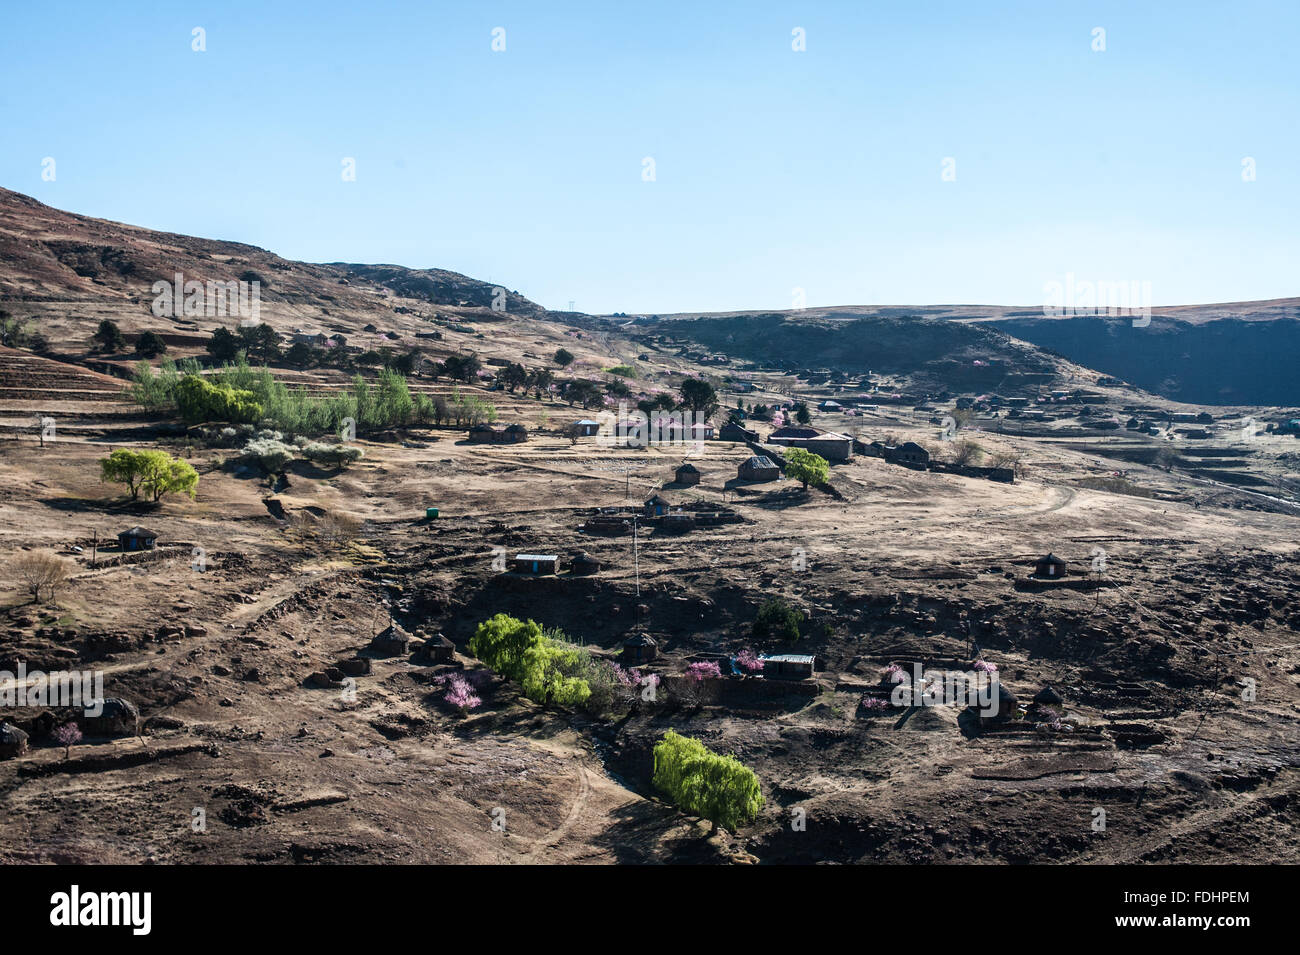 Landscape with village huts and mountaintops in Lesotho, Africa Stock Photo